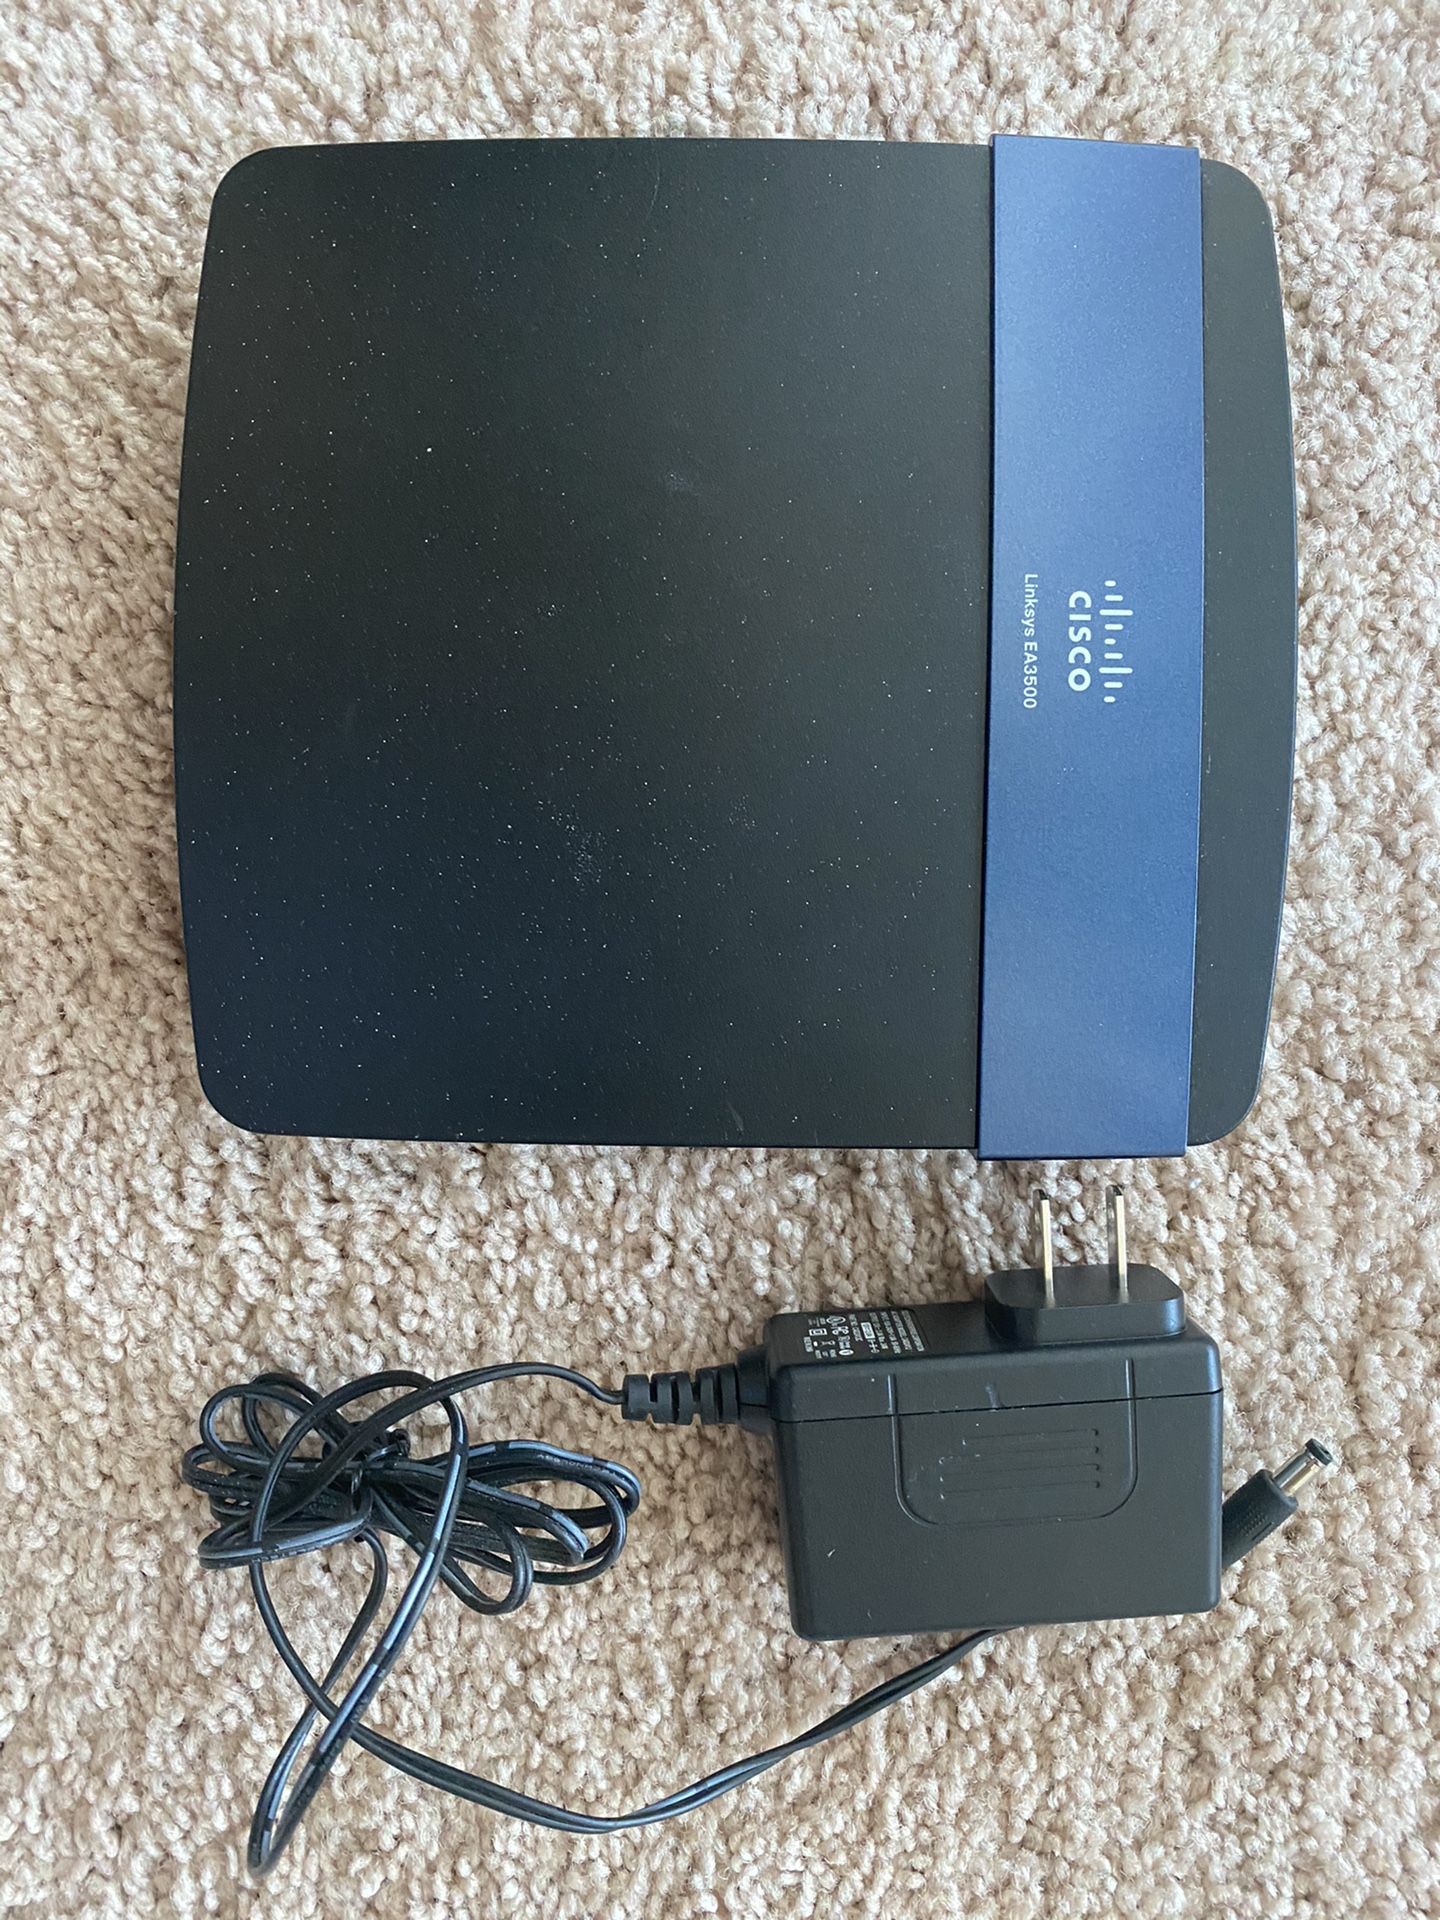 Linksys EA3500 - Dual-Band N750 Router with Gigabit and USB